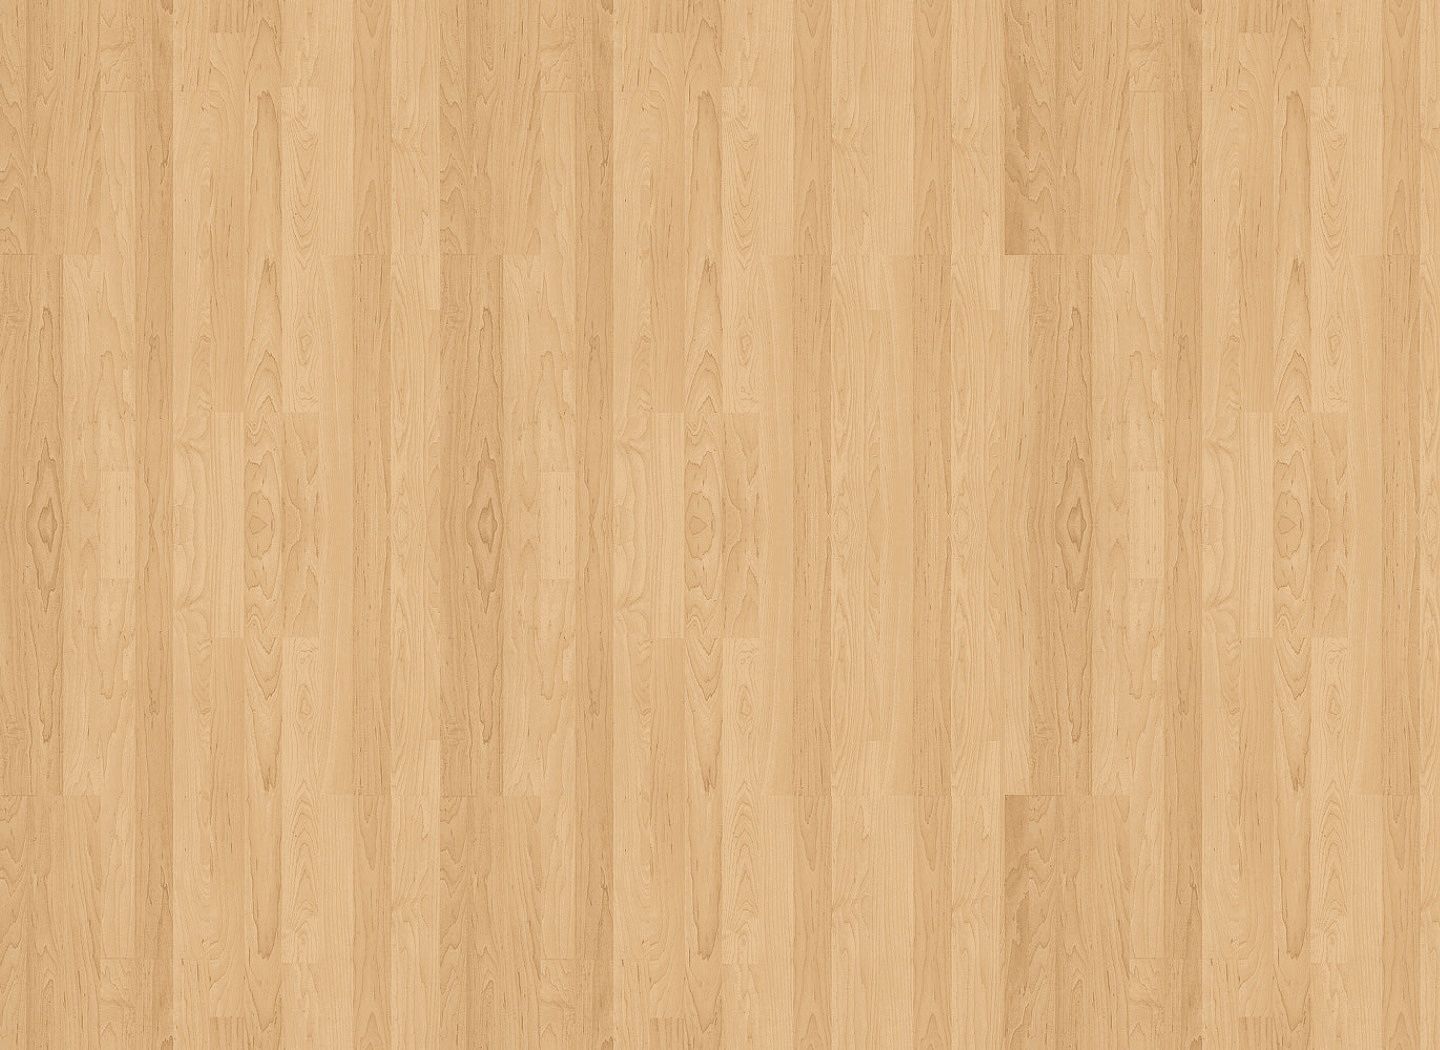 HD Wood Backgrounds Group (60+)